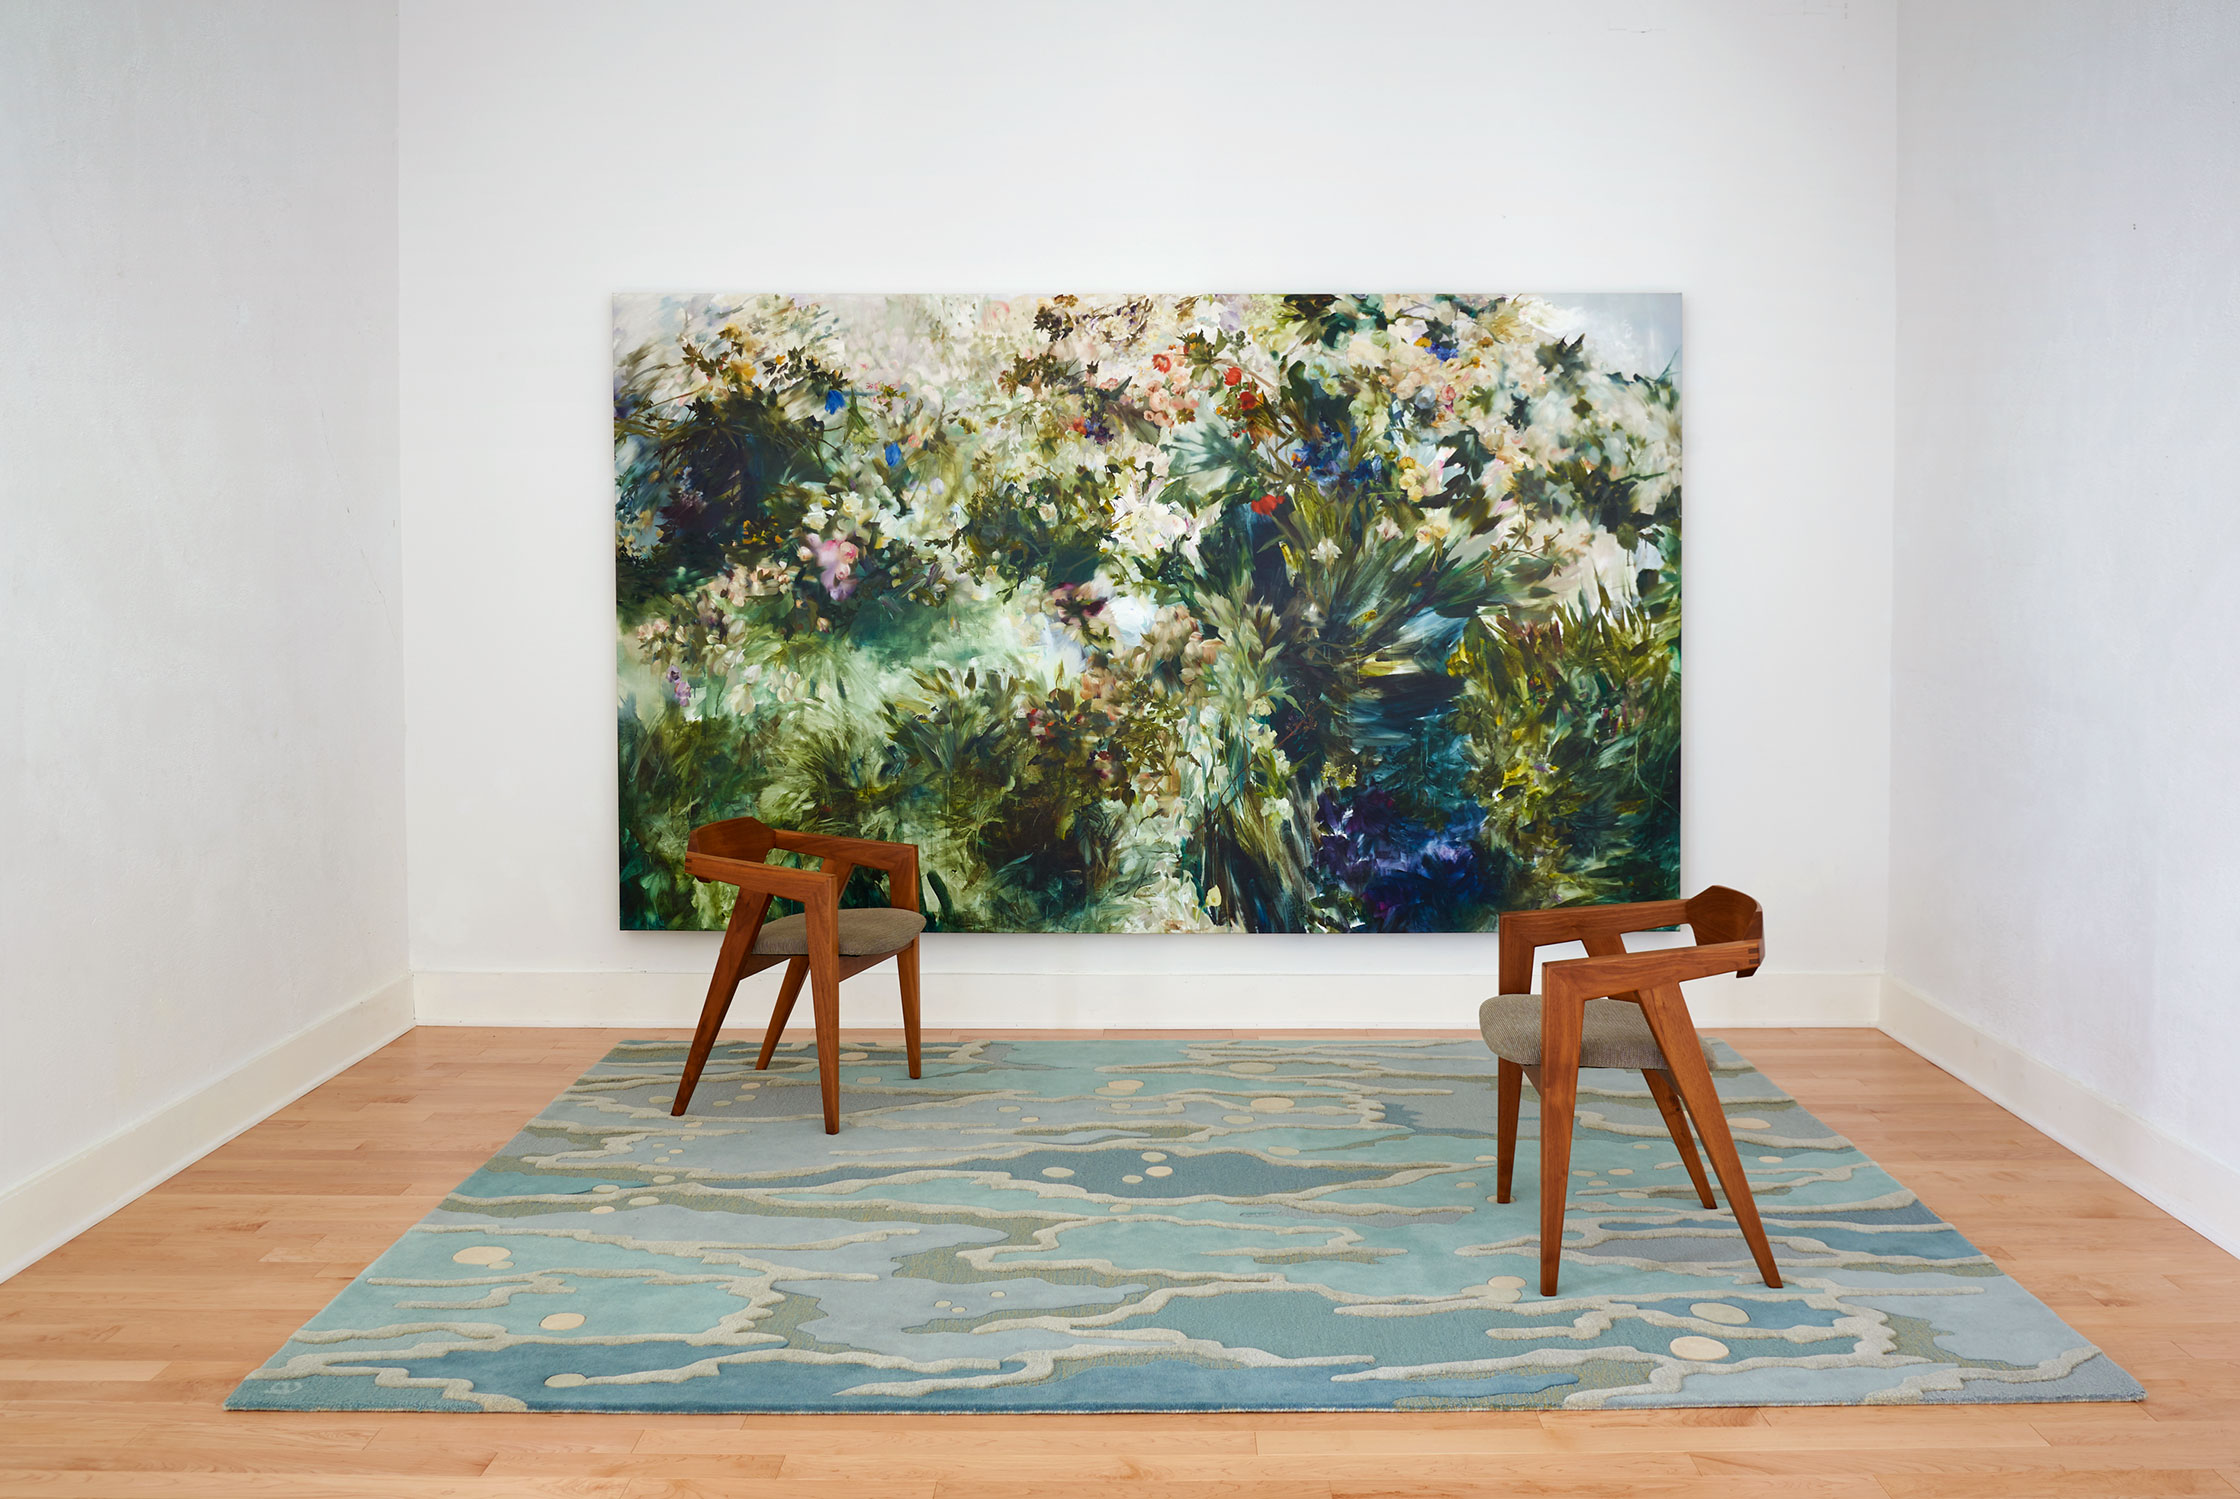 A modern area rug called Ocean Sea Glass sits below a large gallery painting.